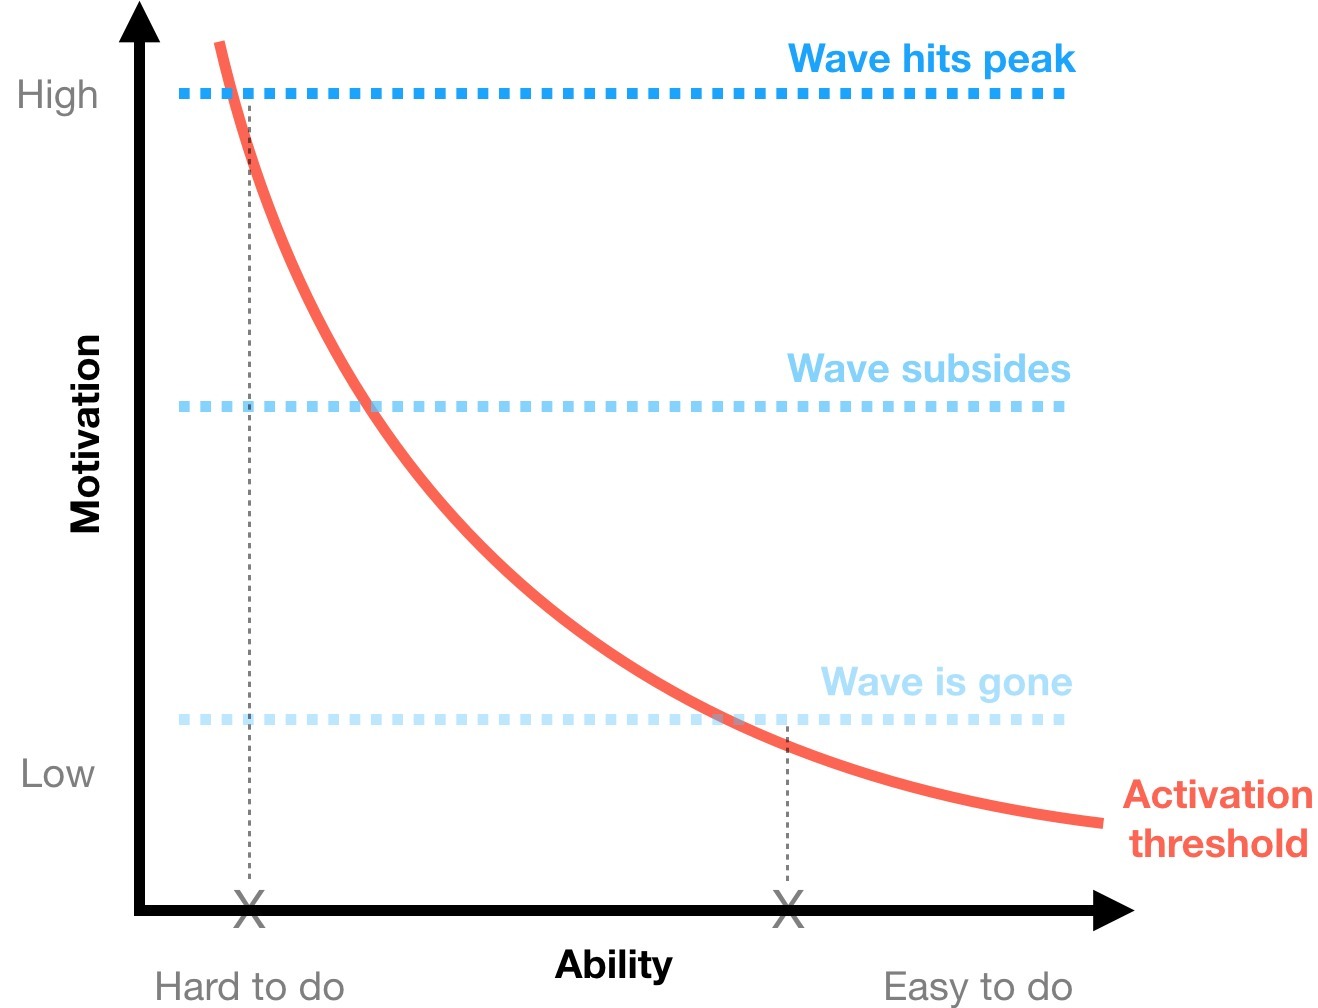 When a motivation wave is upon us, we can do harder things than when the wave has subsided.